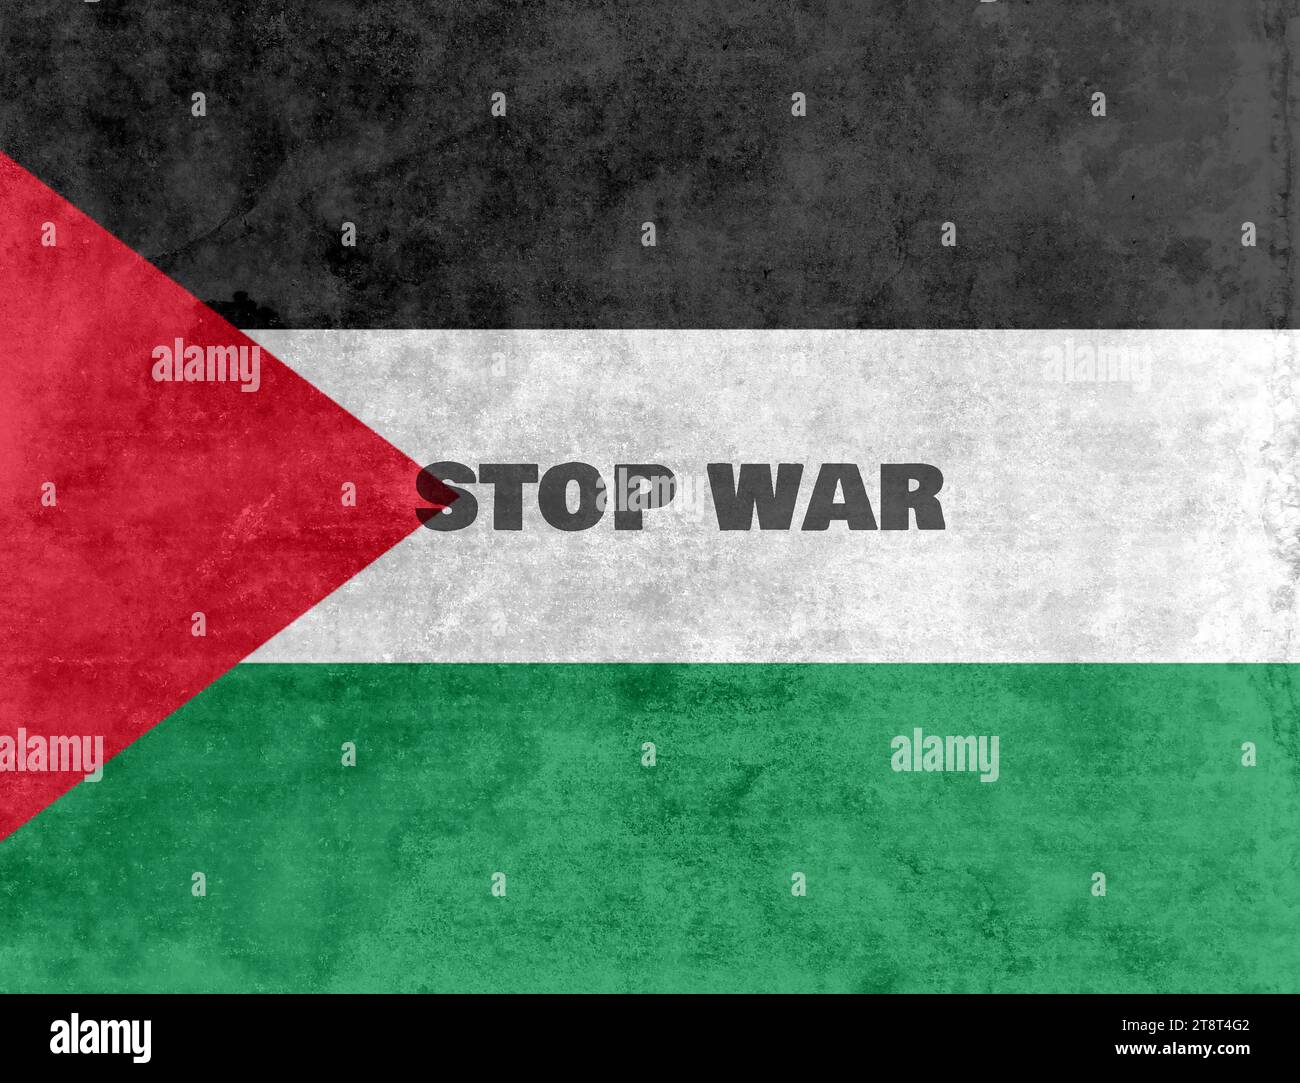 Damaged grunge flag of Palestine, Palestinian Territories with the text Stop war Stock Photo